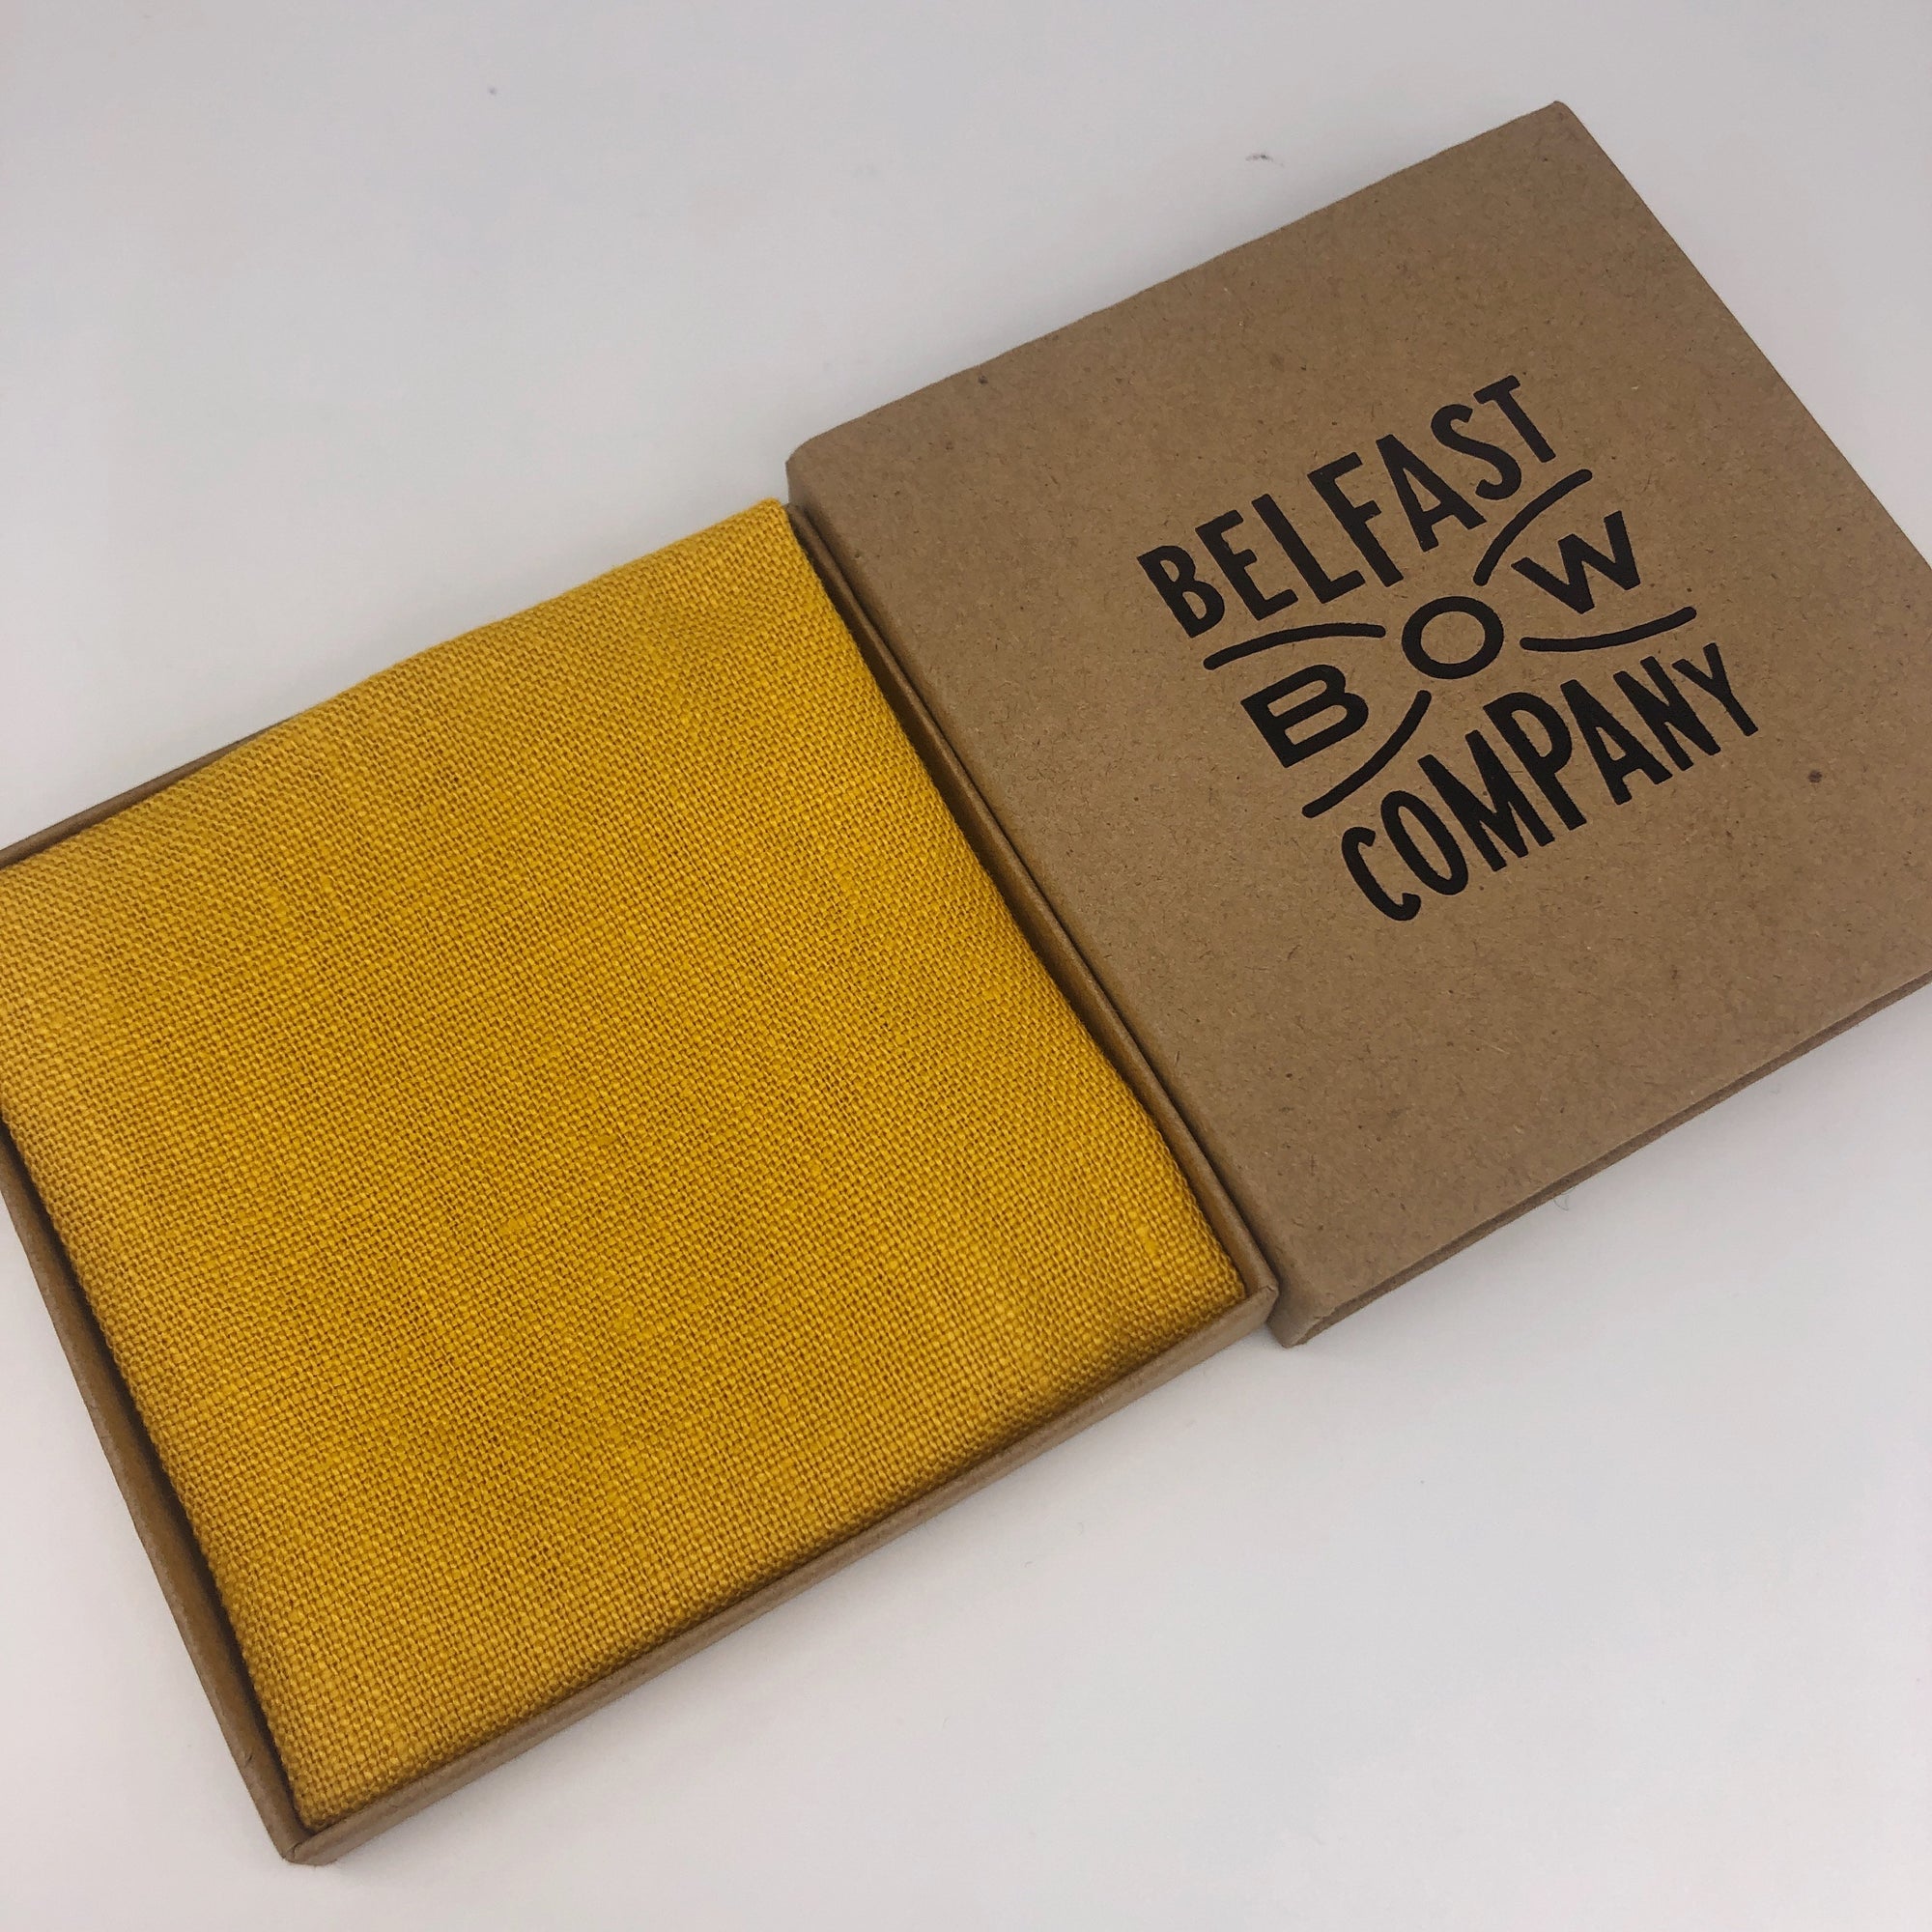 Irish Linen Pocket Square in Mustard Yellow by the Belfast Bow Company